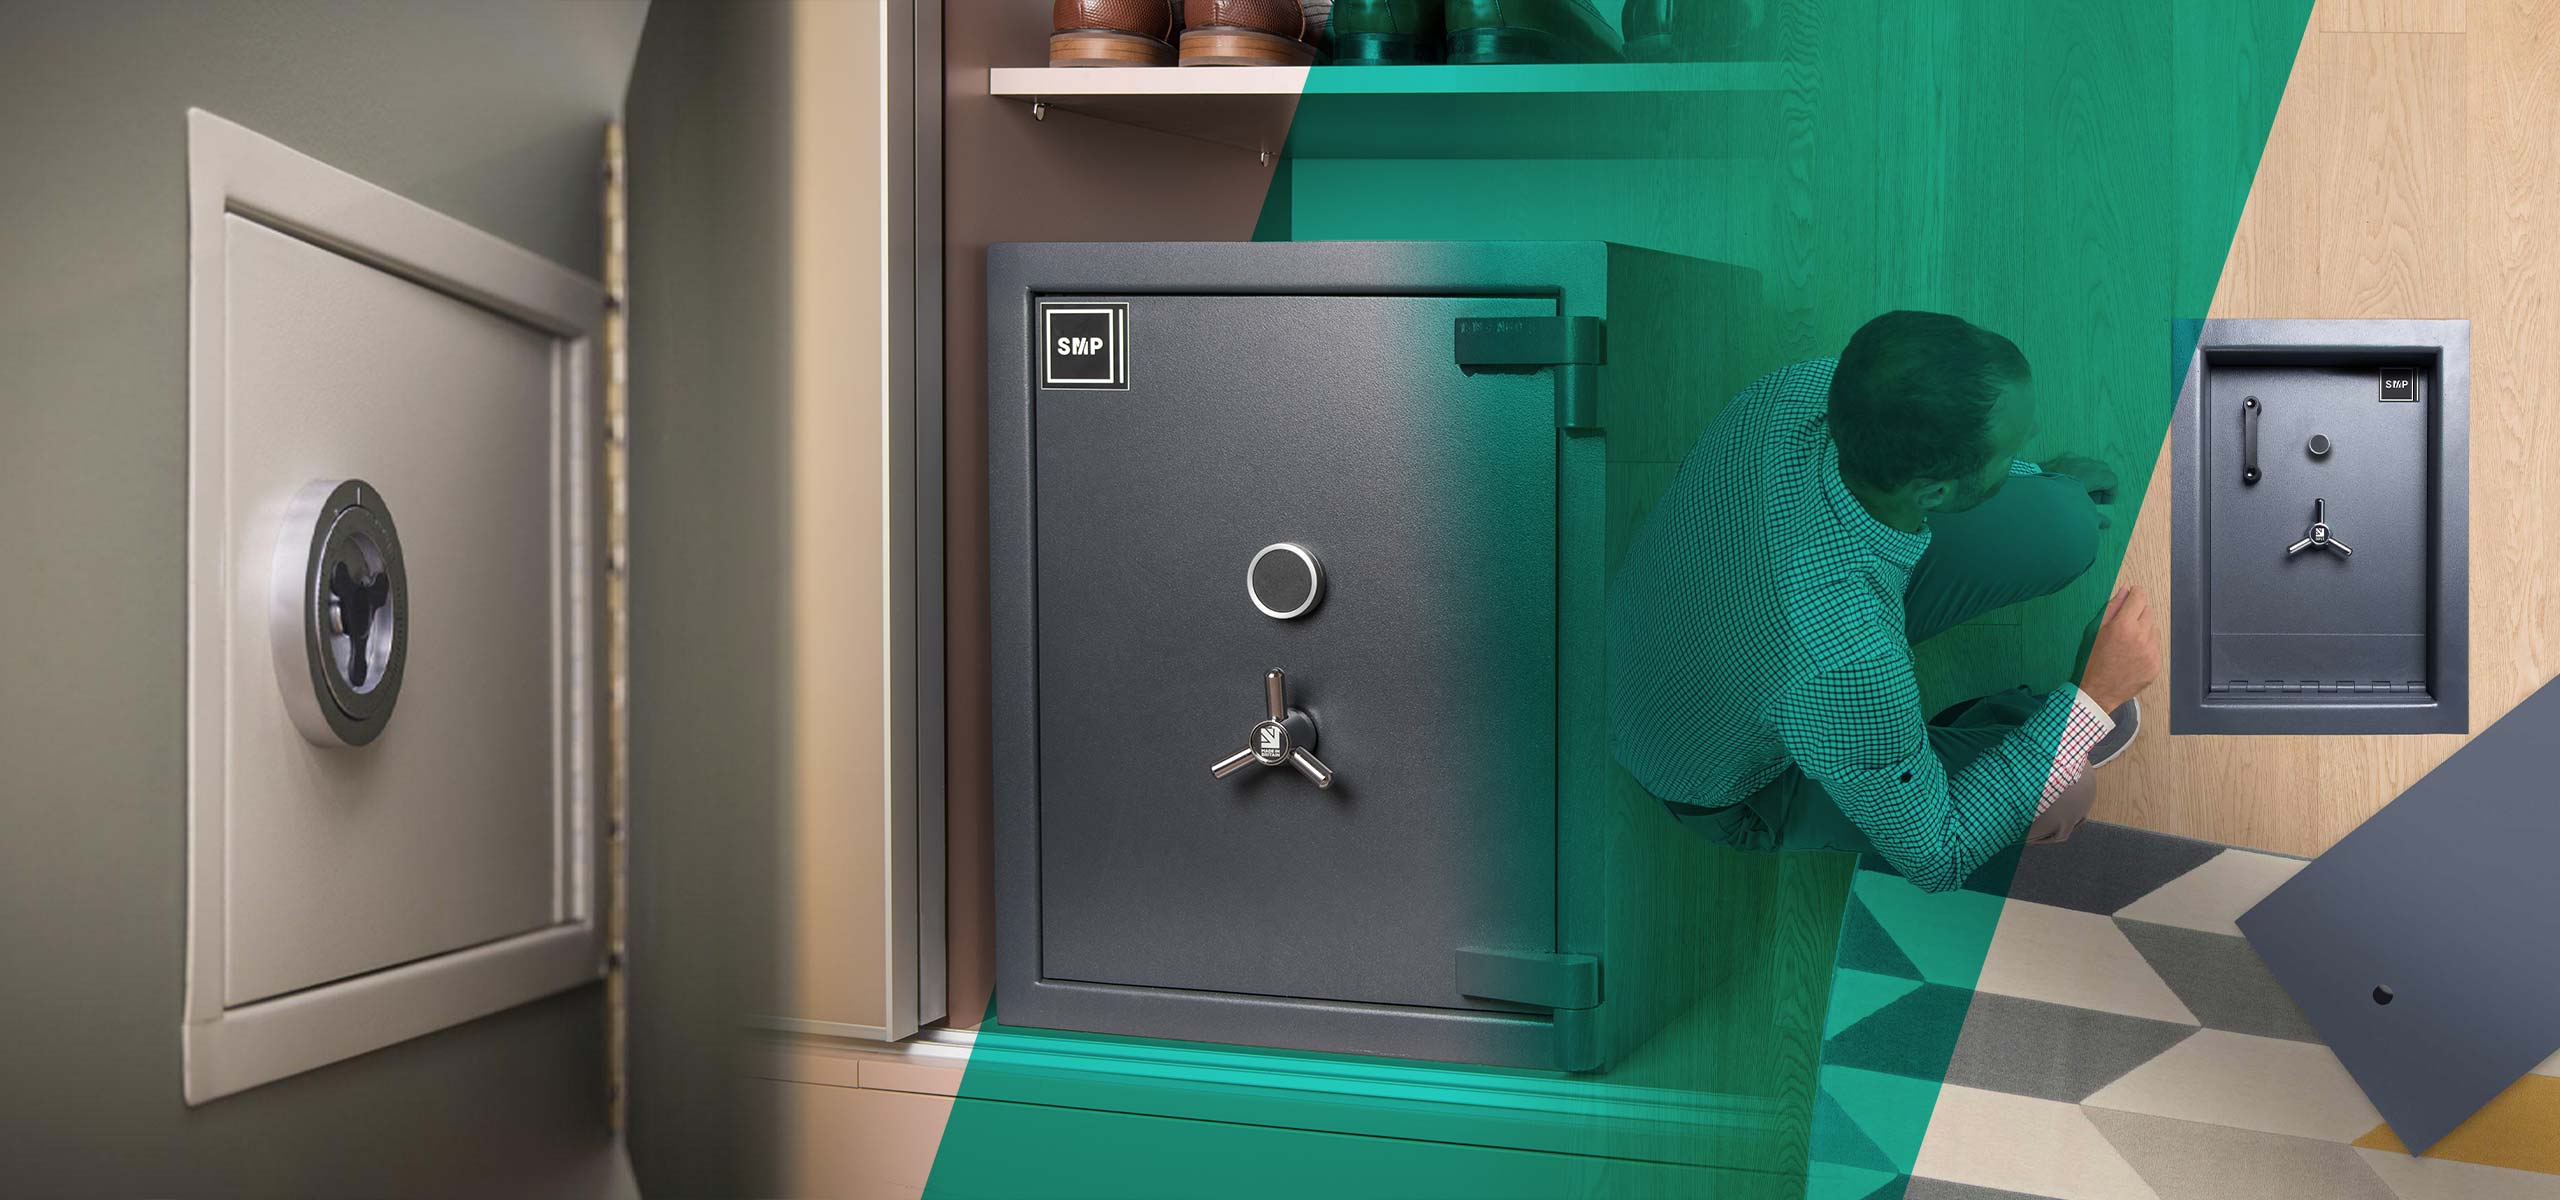 What types of safes are there